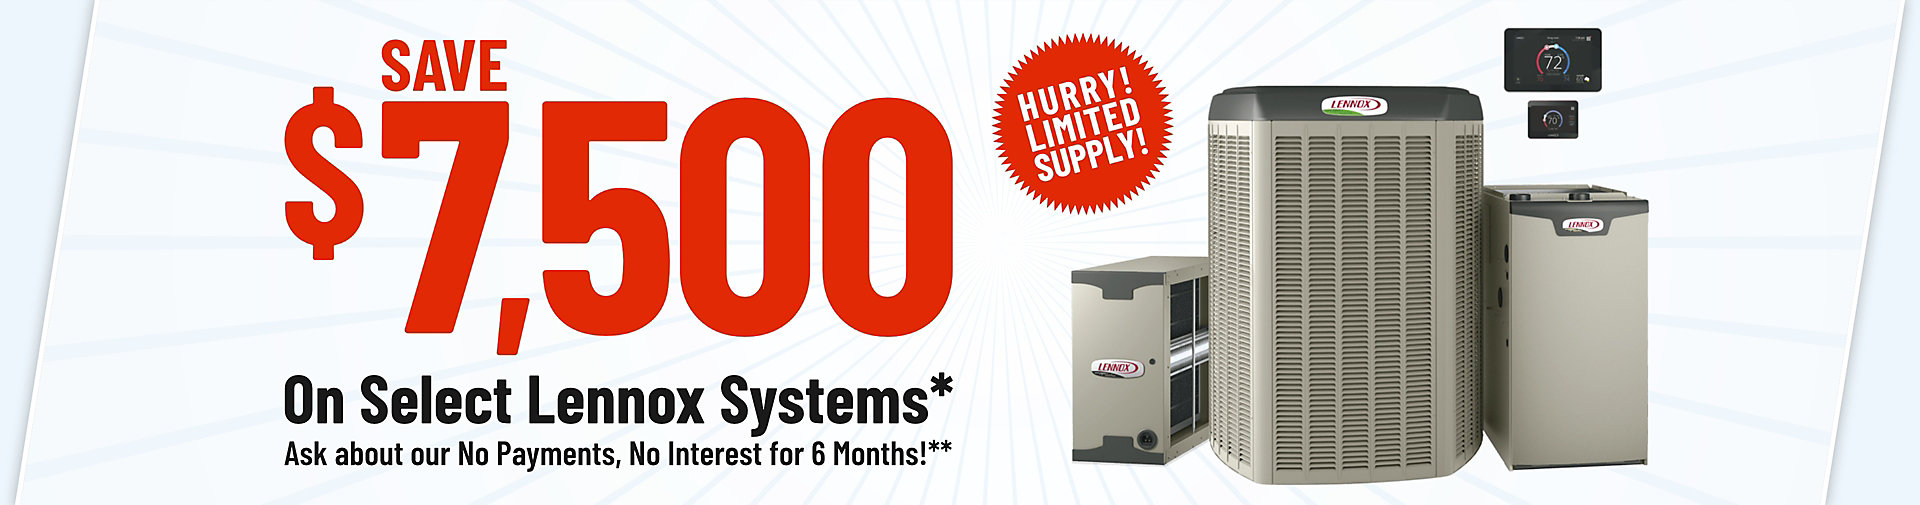 Save $7,500 on Select Lennox Systems